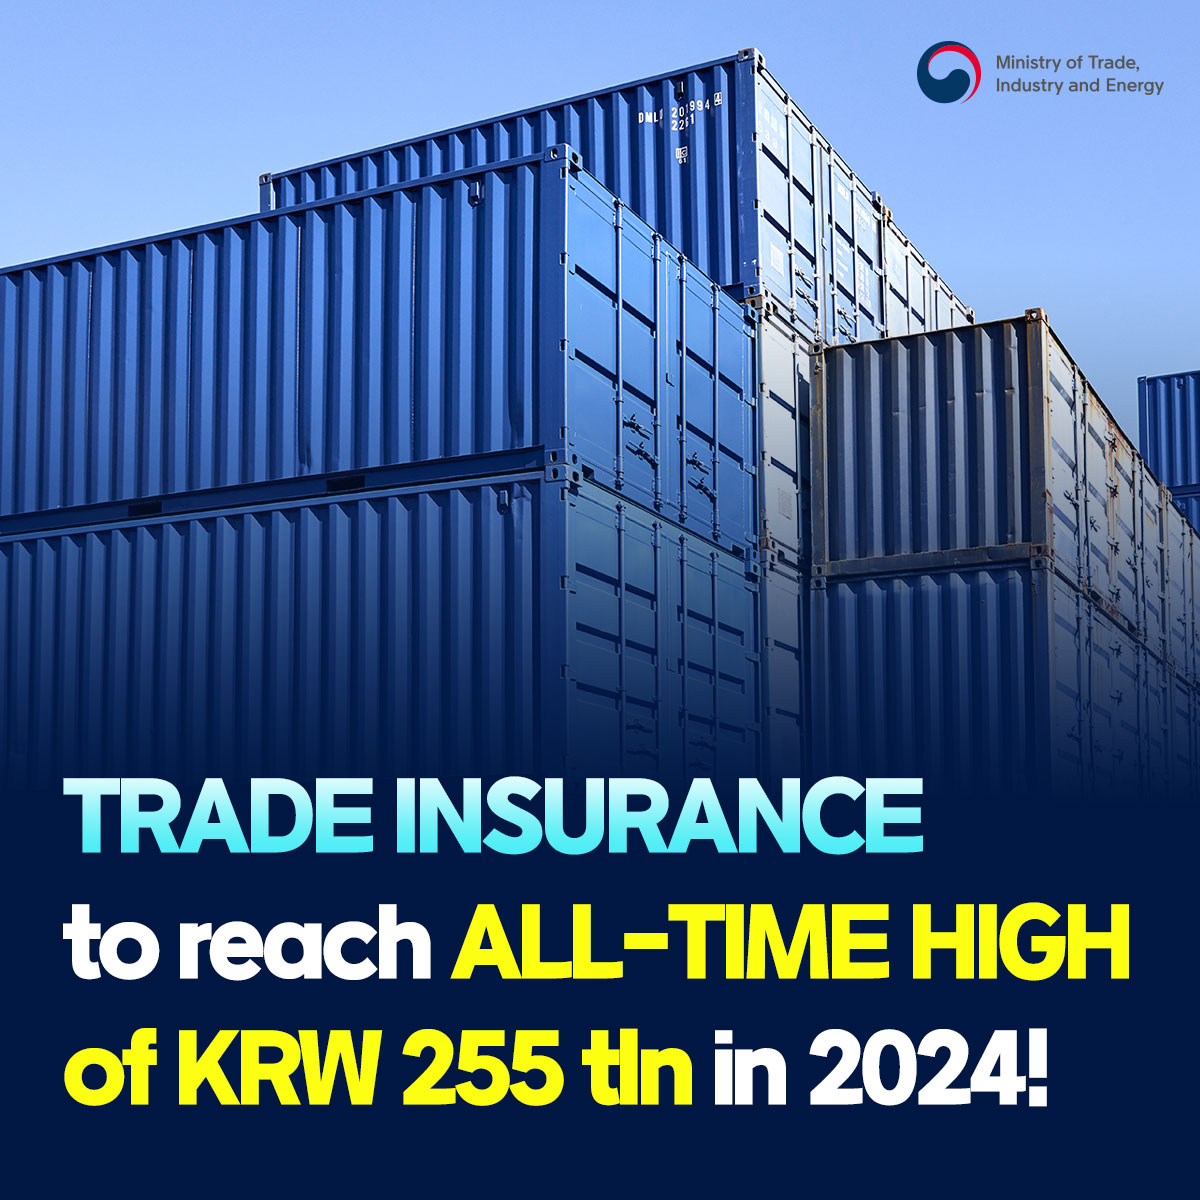 Trade insurance to reach all-time high in 2024!